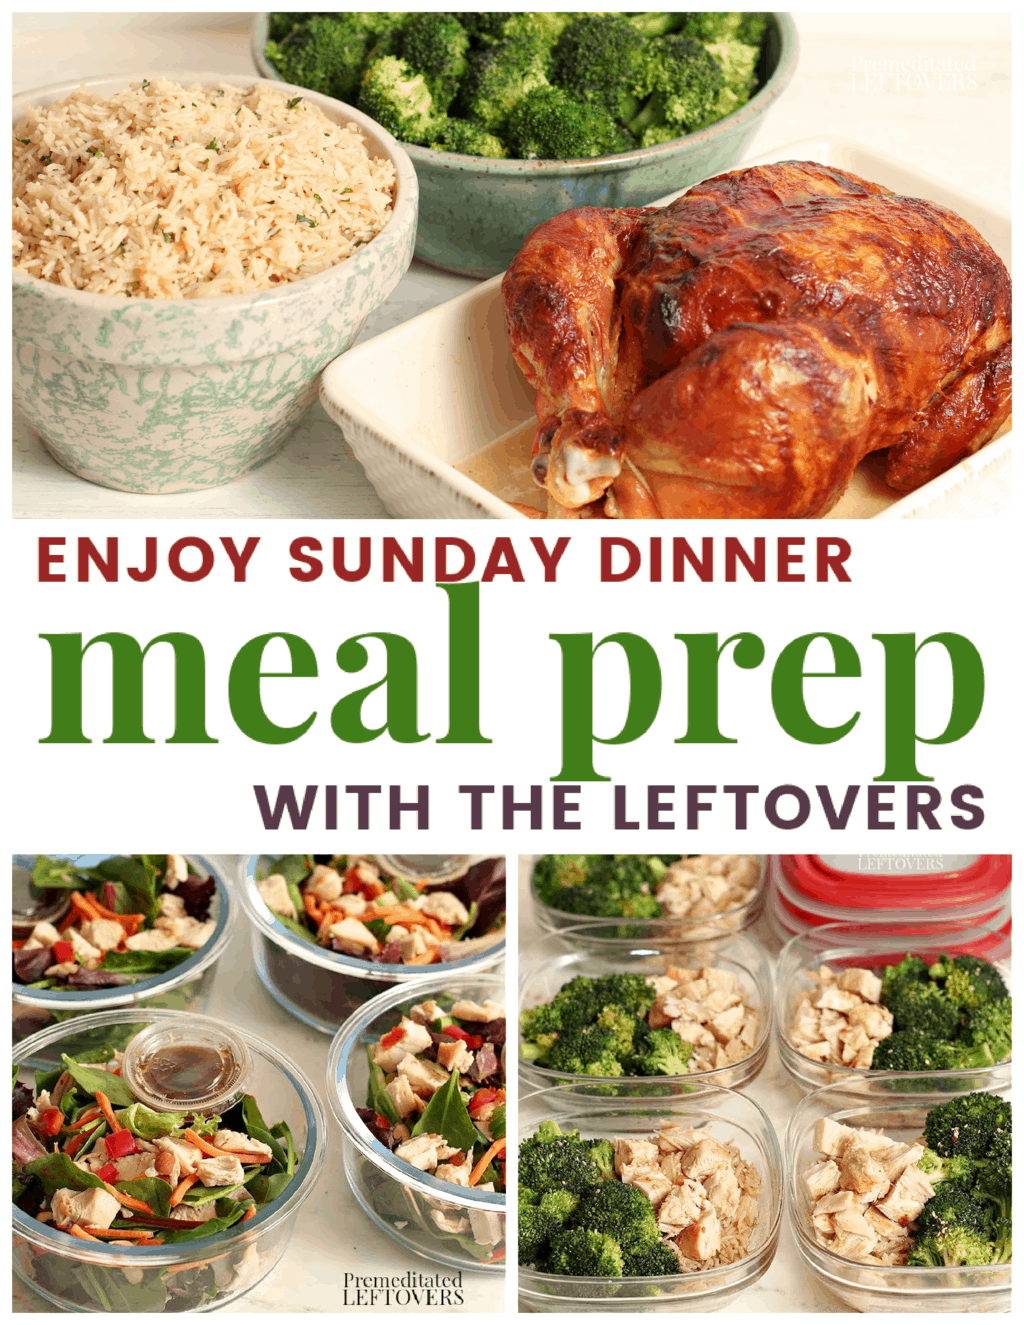 Sunday dinner and weekly meal prep with the leftovers